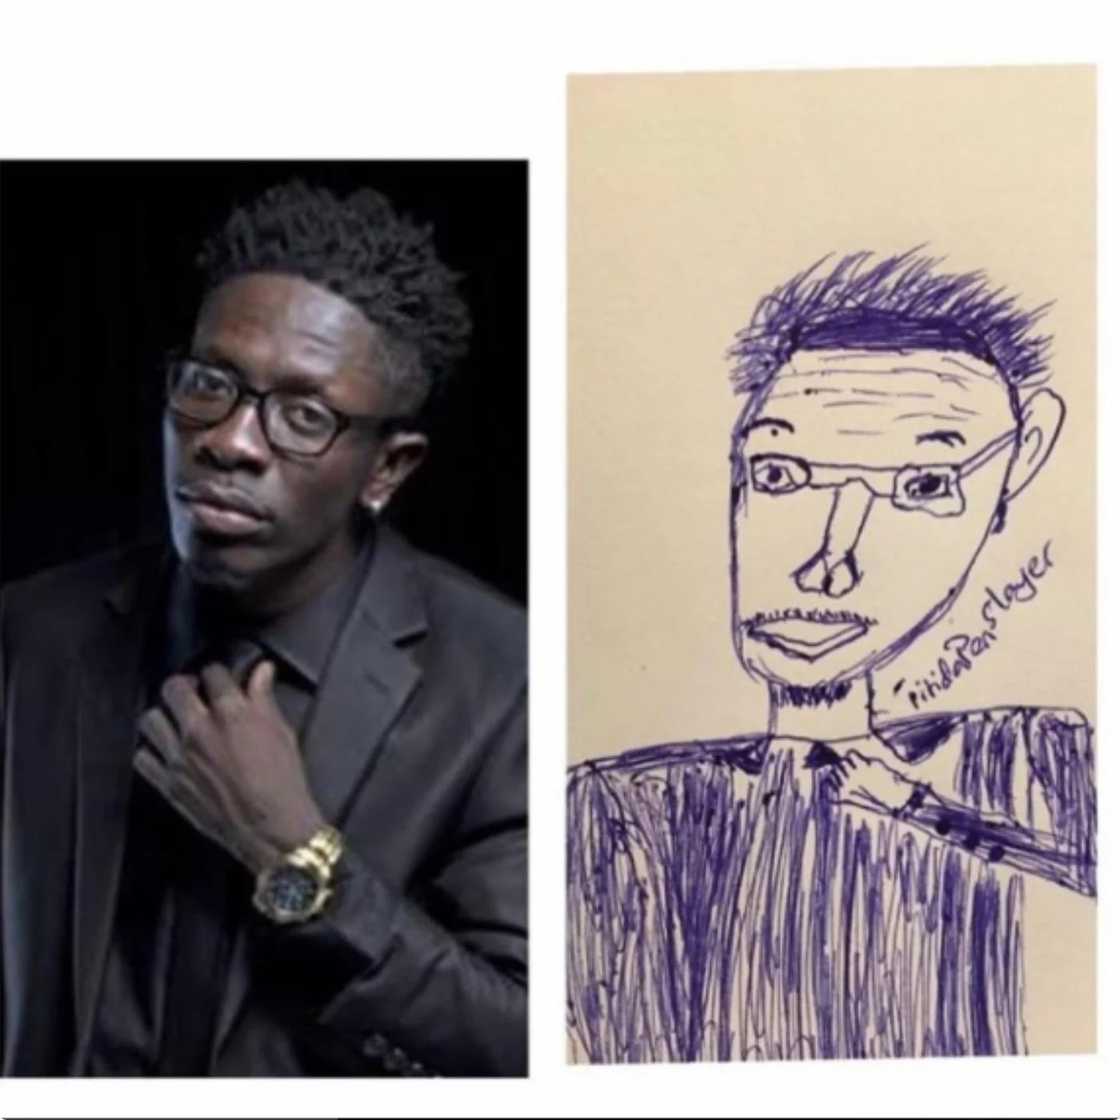 Pen artist draws hilarious pictures of celebrities on paper